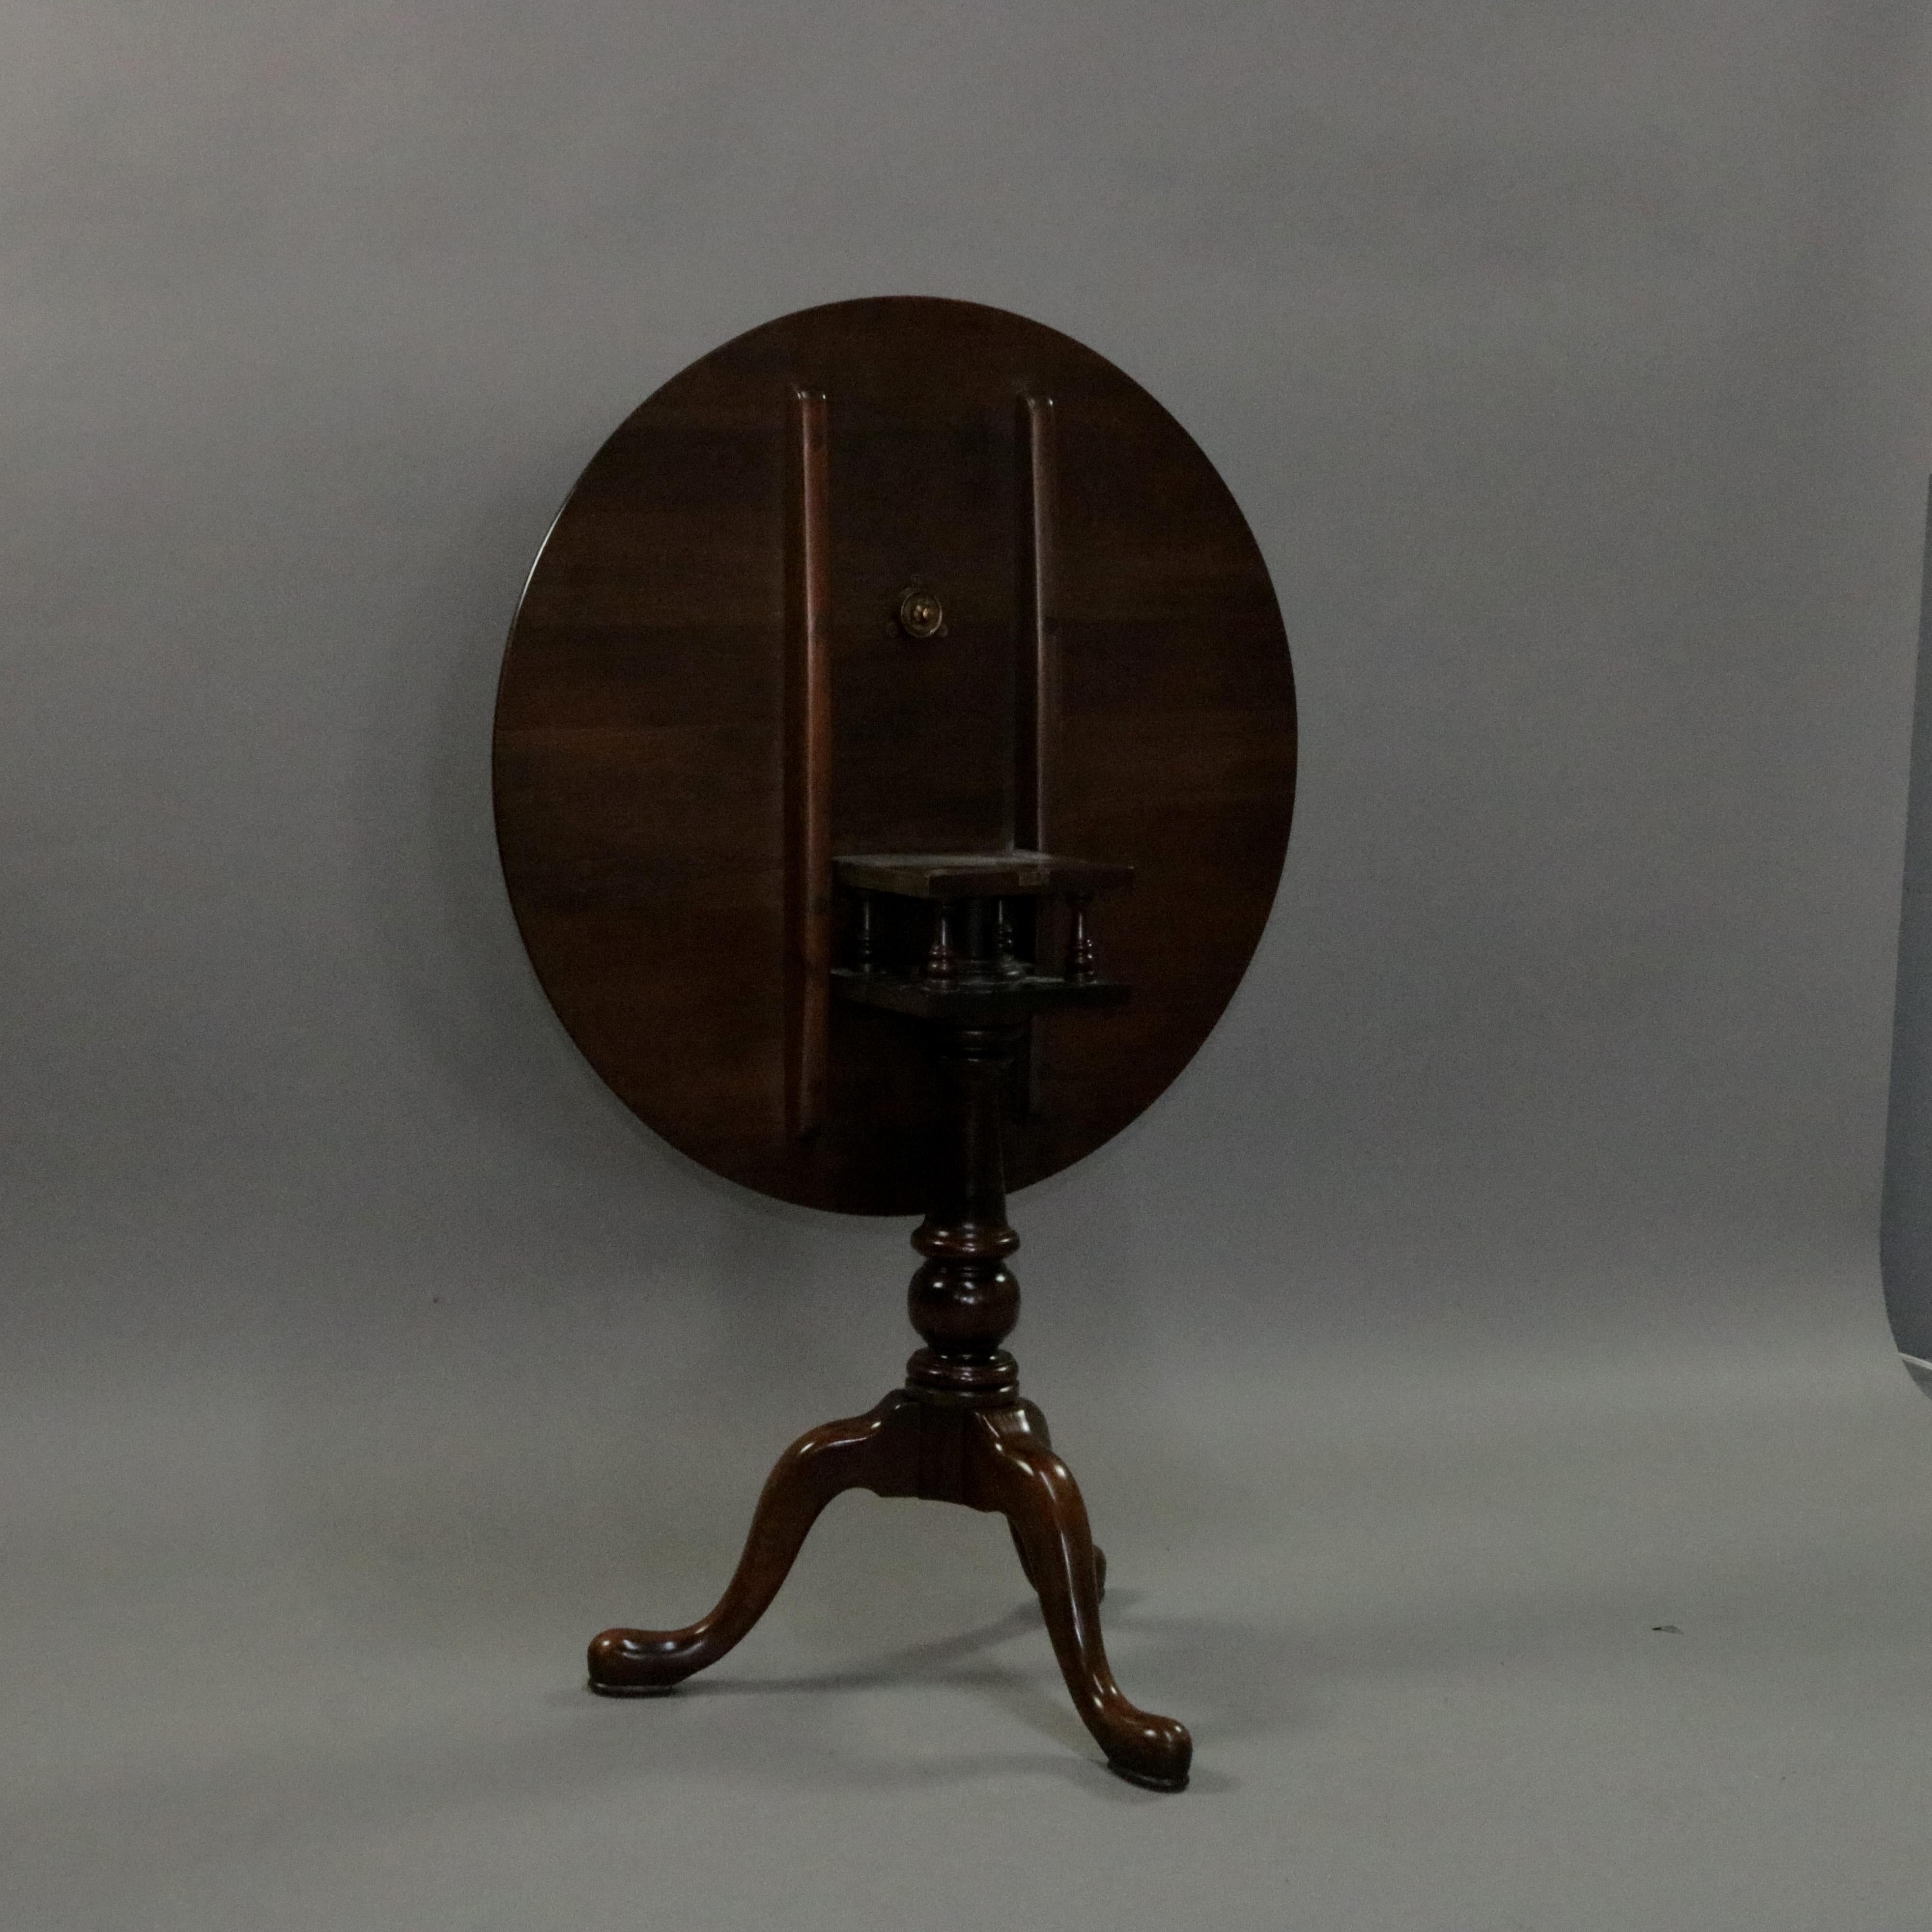 A Queen Anne style tilt-top side table features mahogany construction with round tilt-top having birdcage surmounting turned tripod base seated on cabriole legs with pad feet, 20th century.

***DELIVERY NOTICE – Due to COVID-19 we are employing